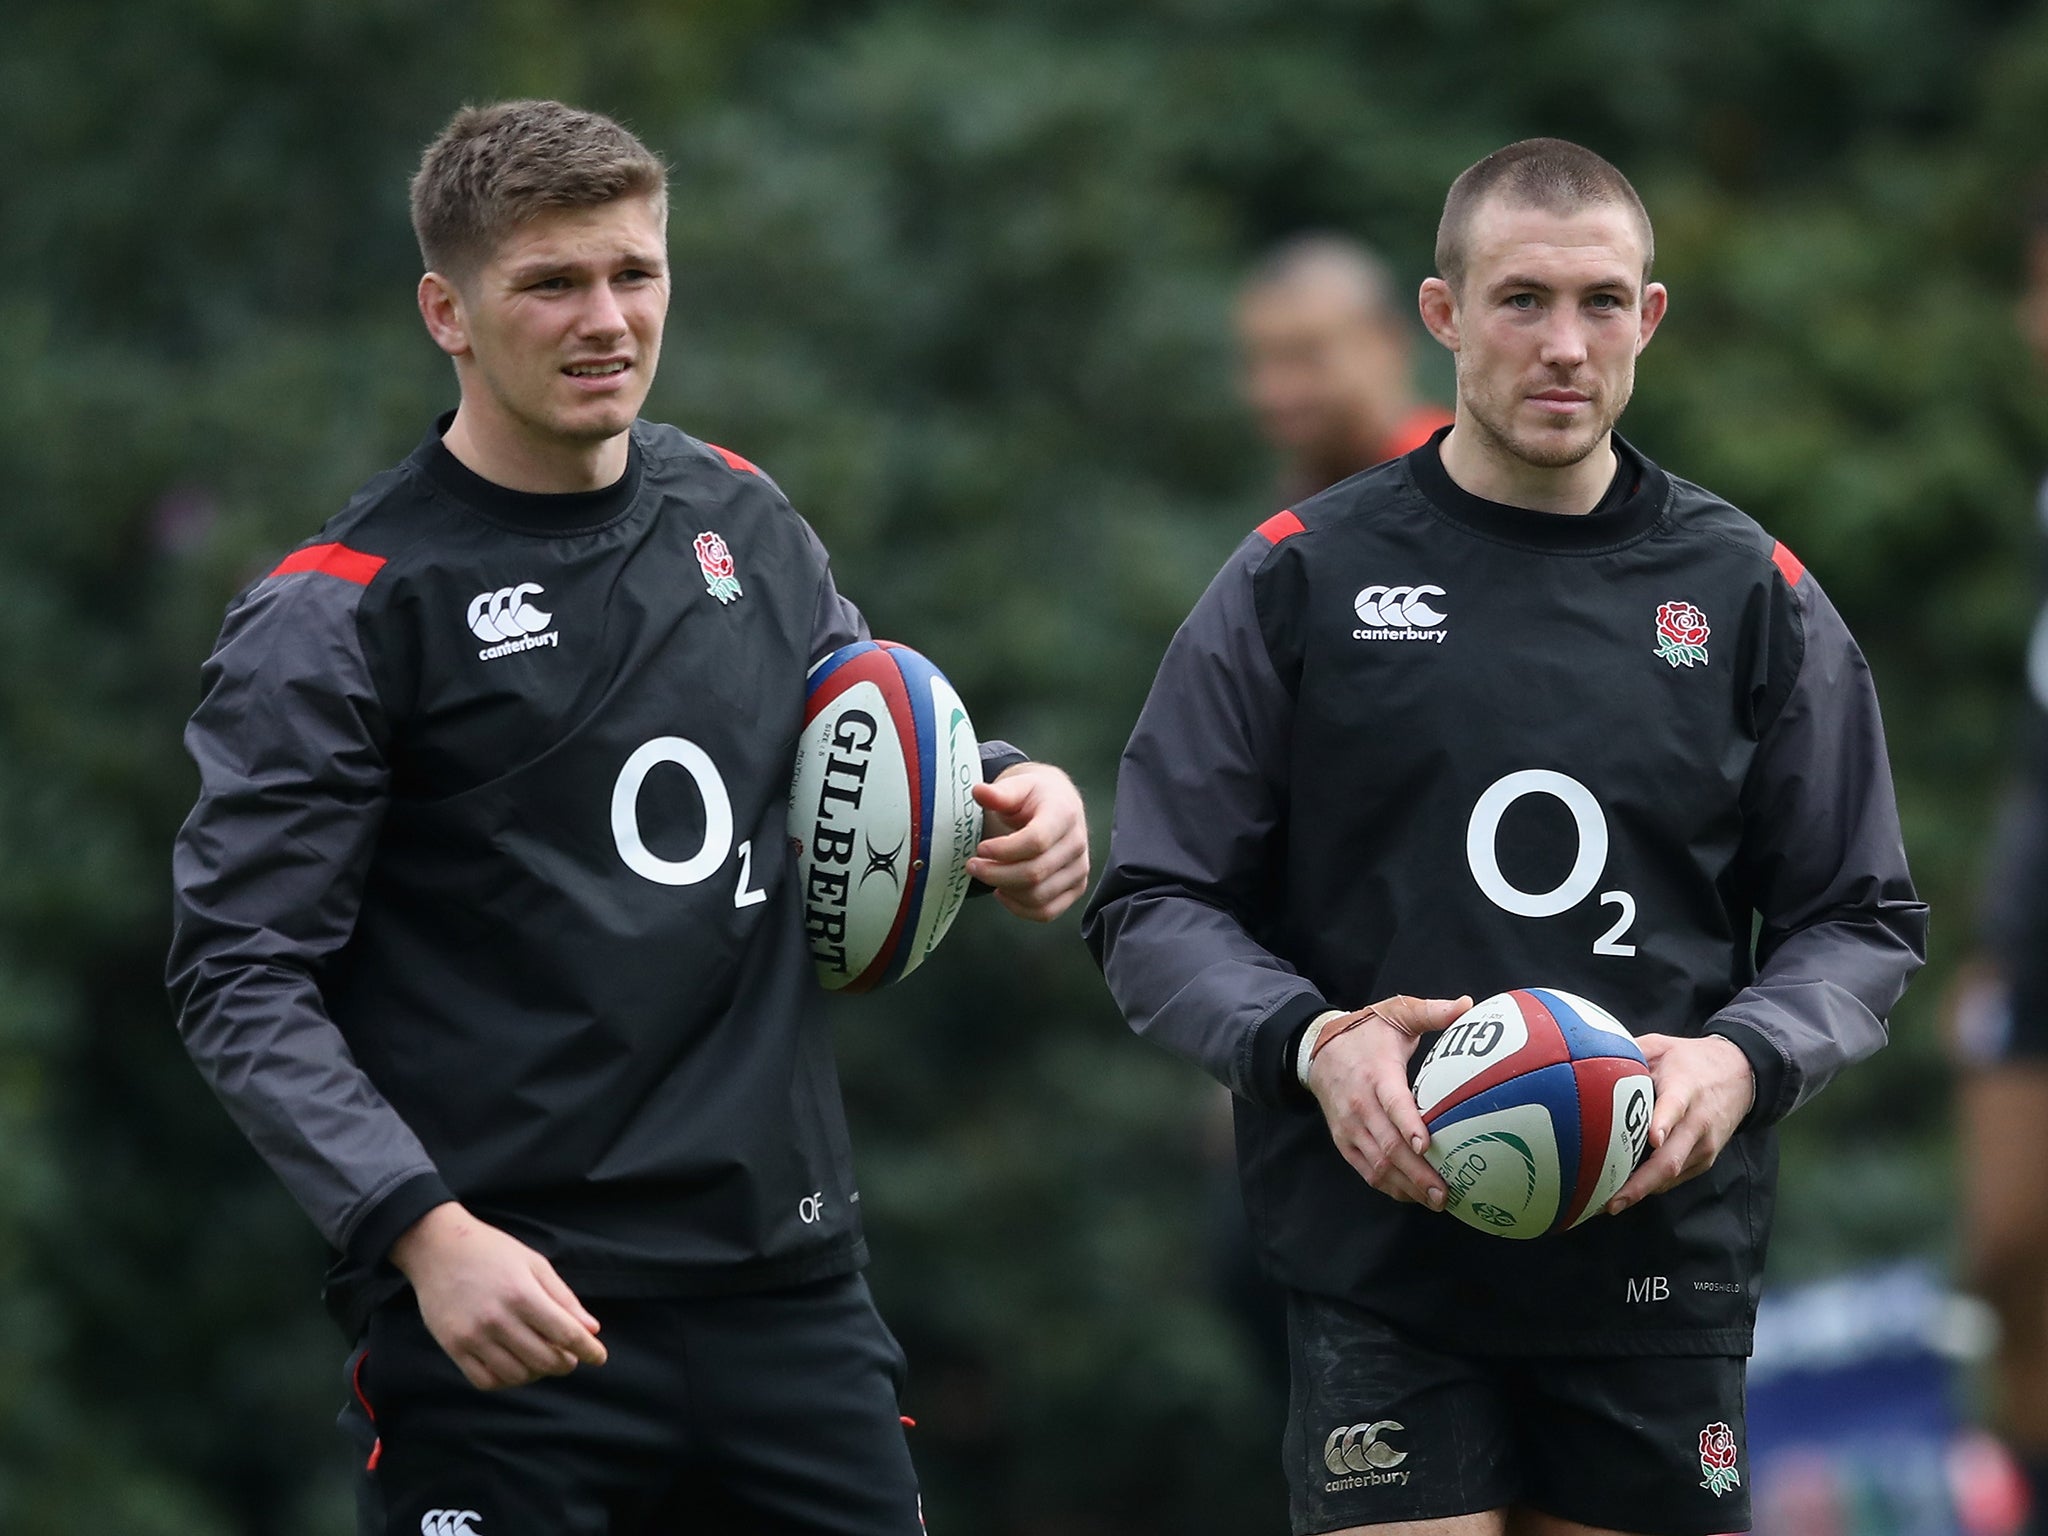 Mike Brown believes Owen Farrell will lead by example when he captains England